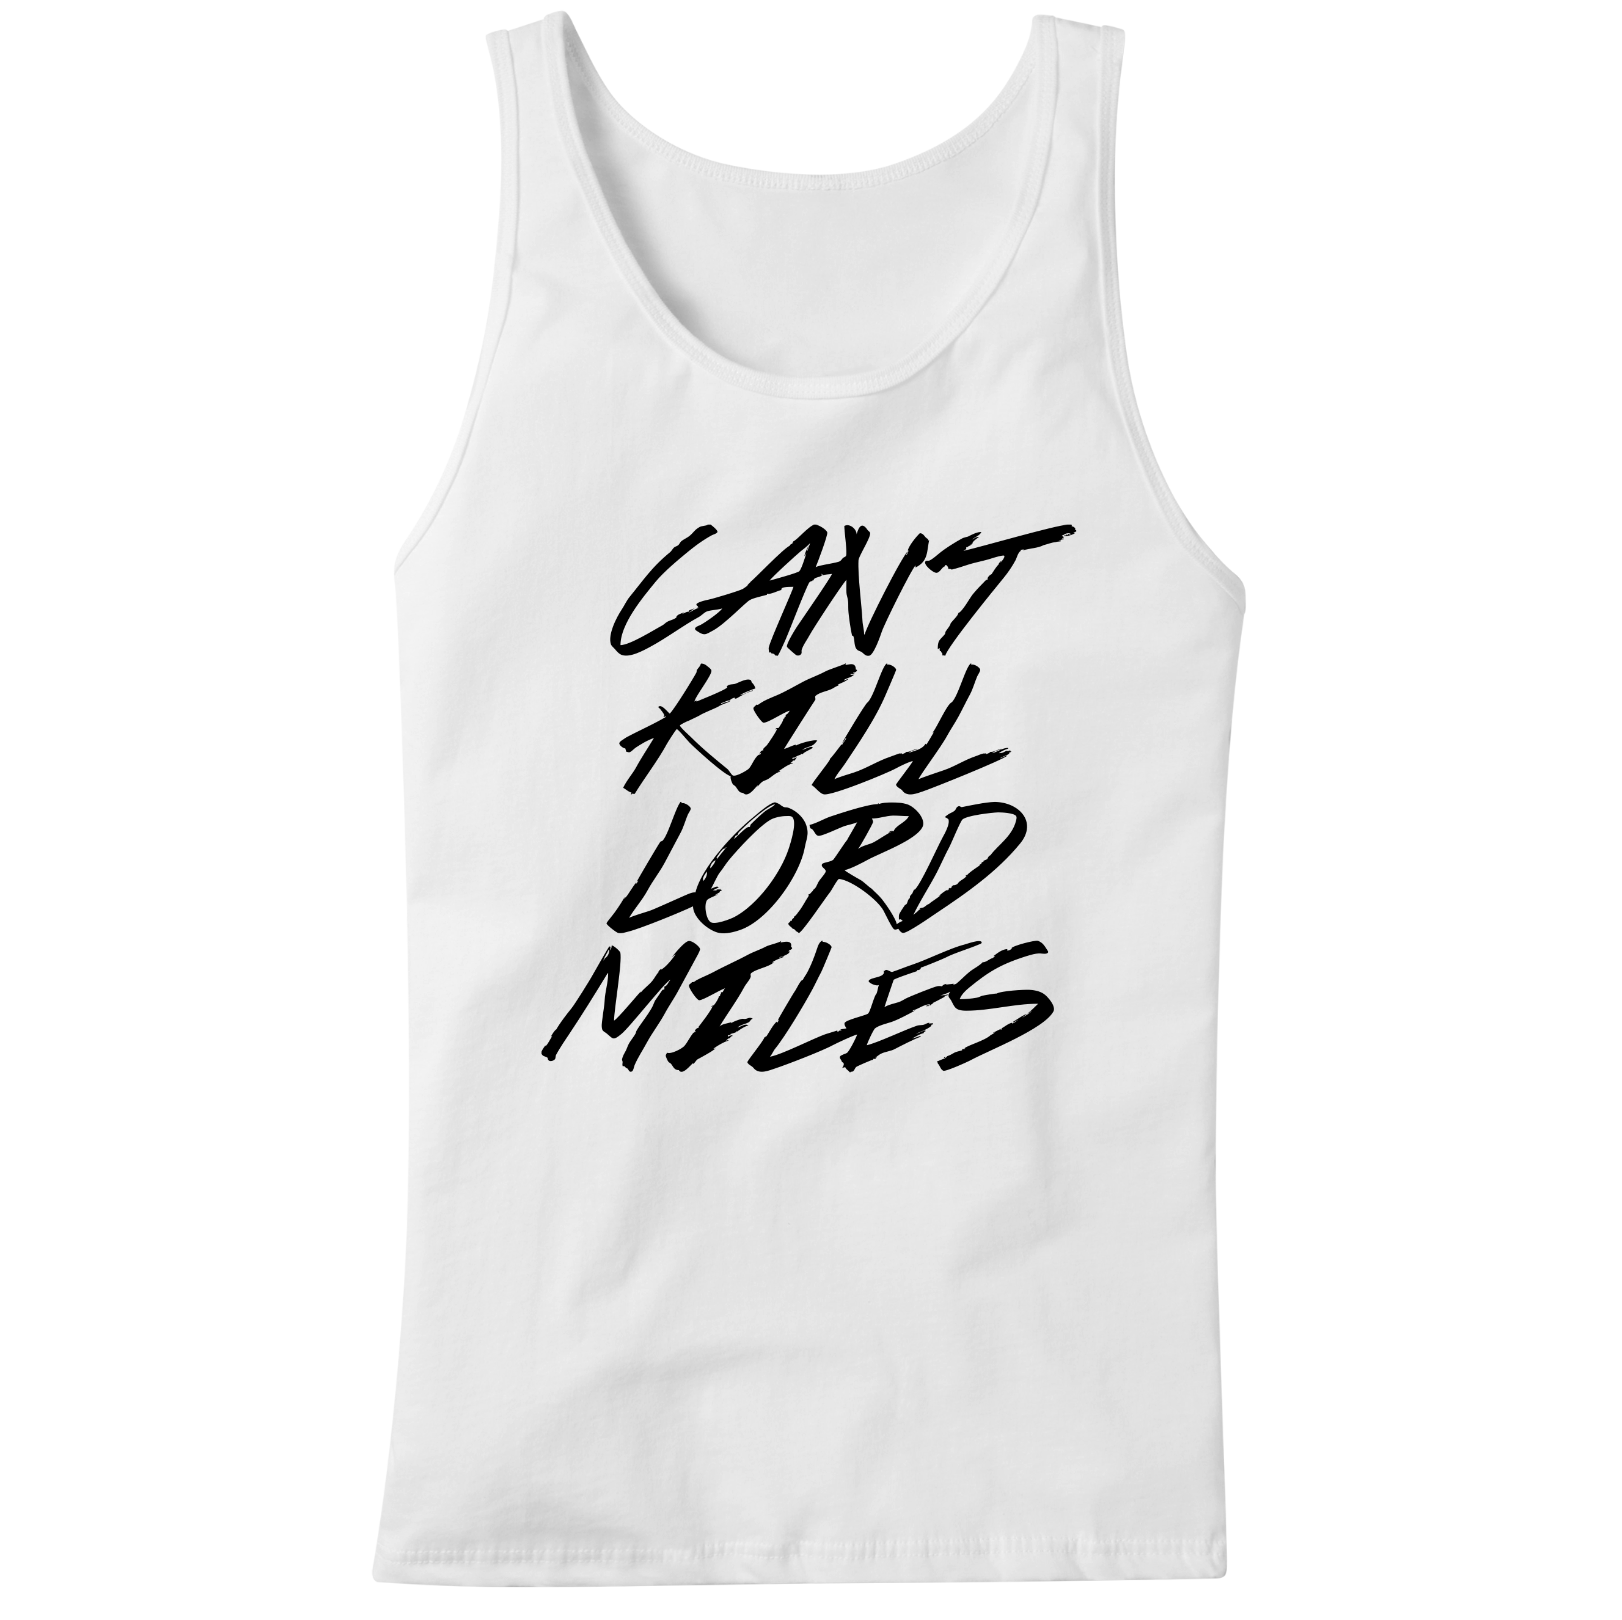 Cant Kill Lord Miles (White) Tanktop